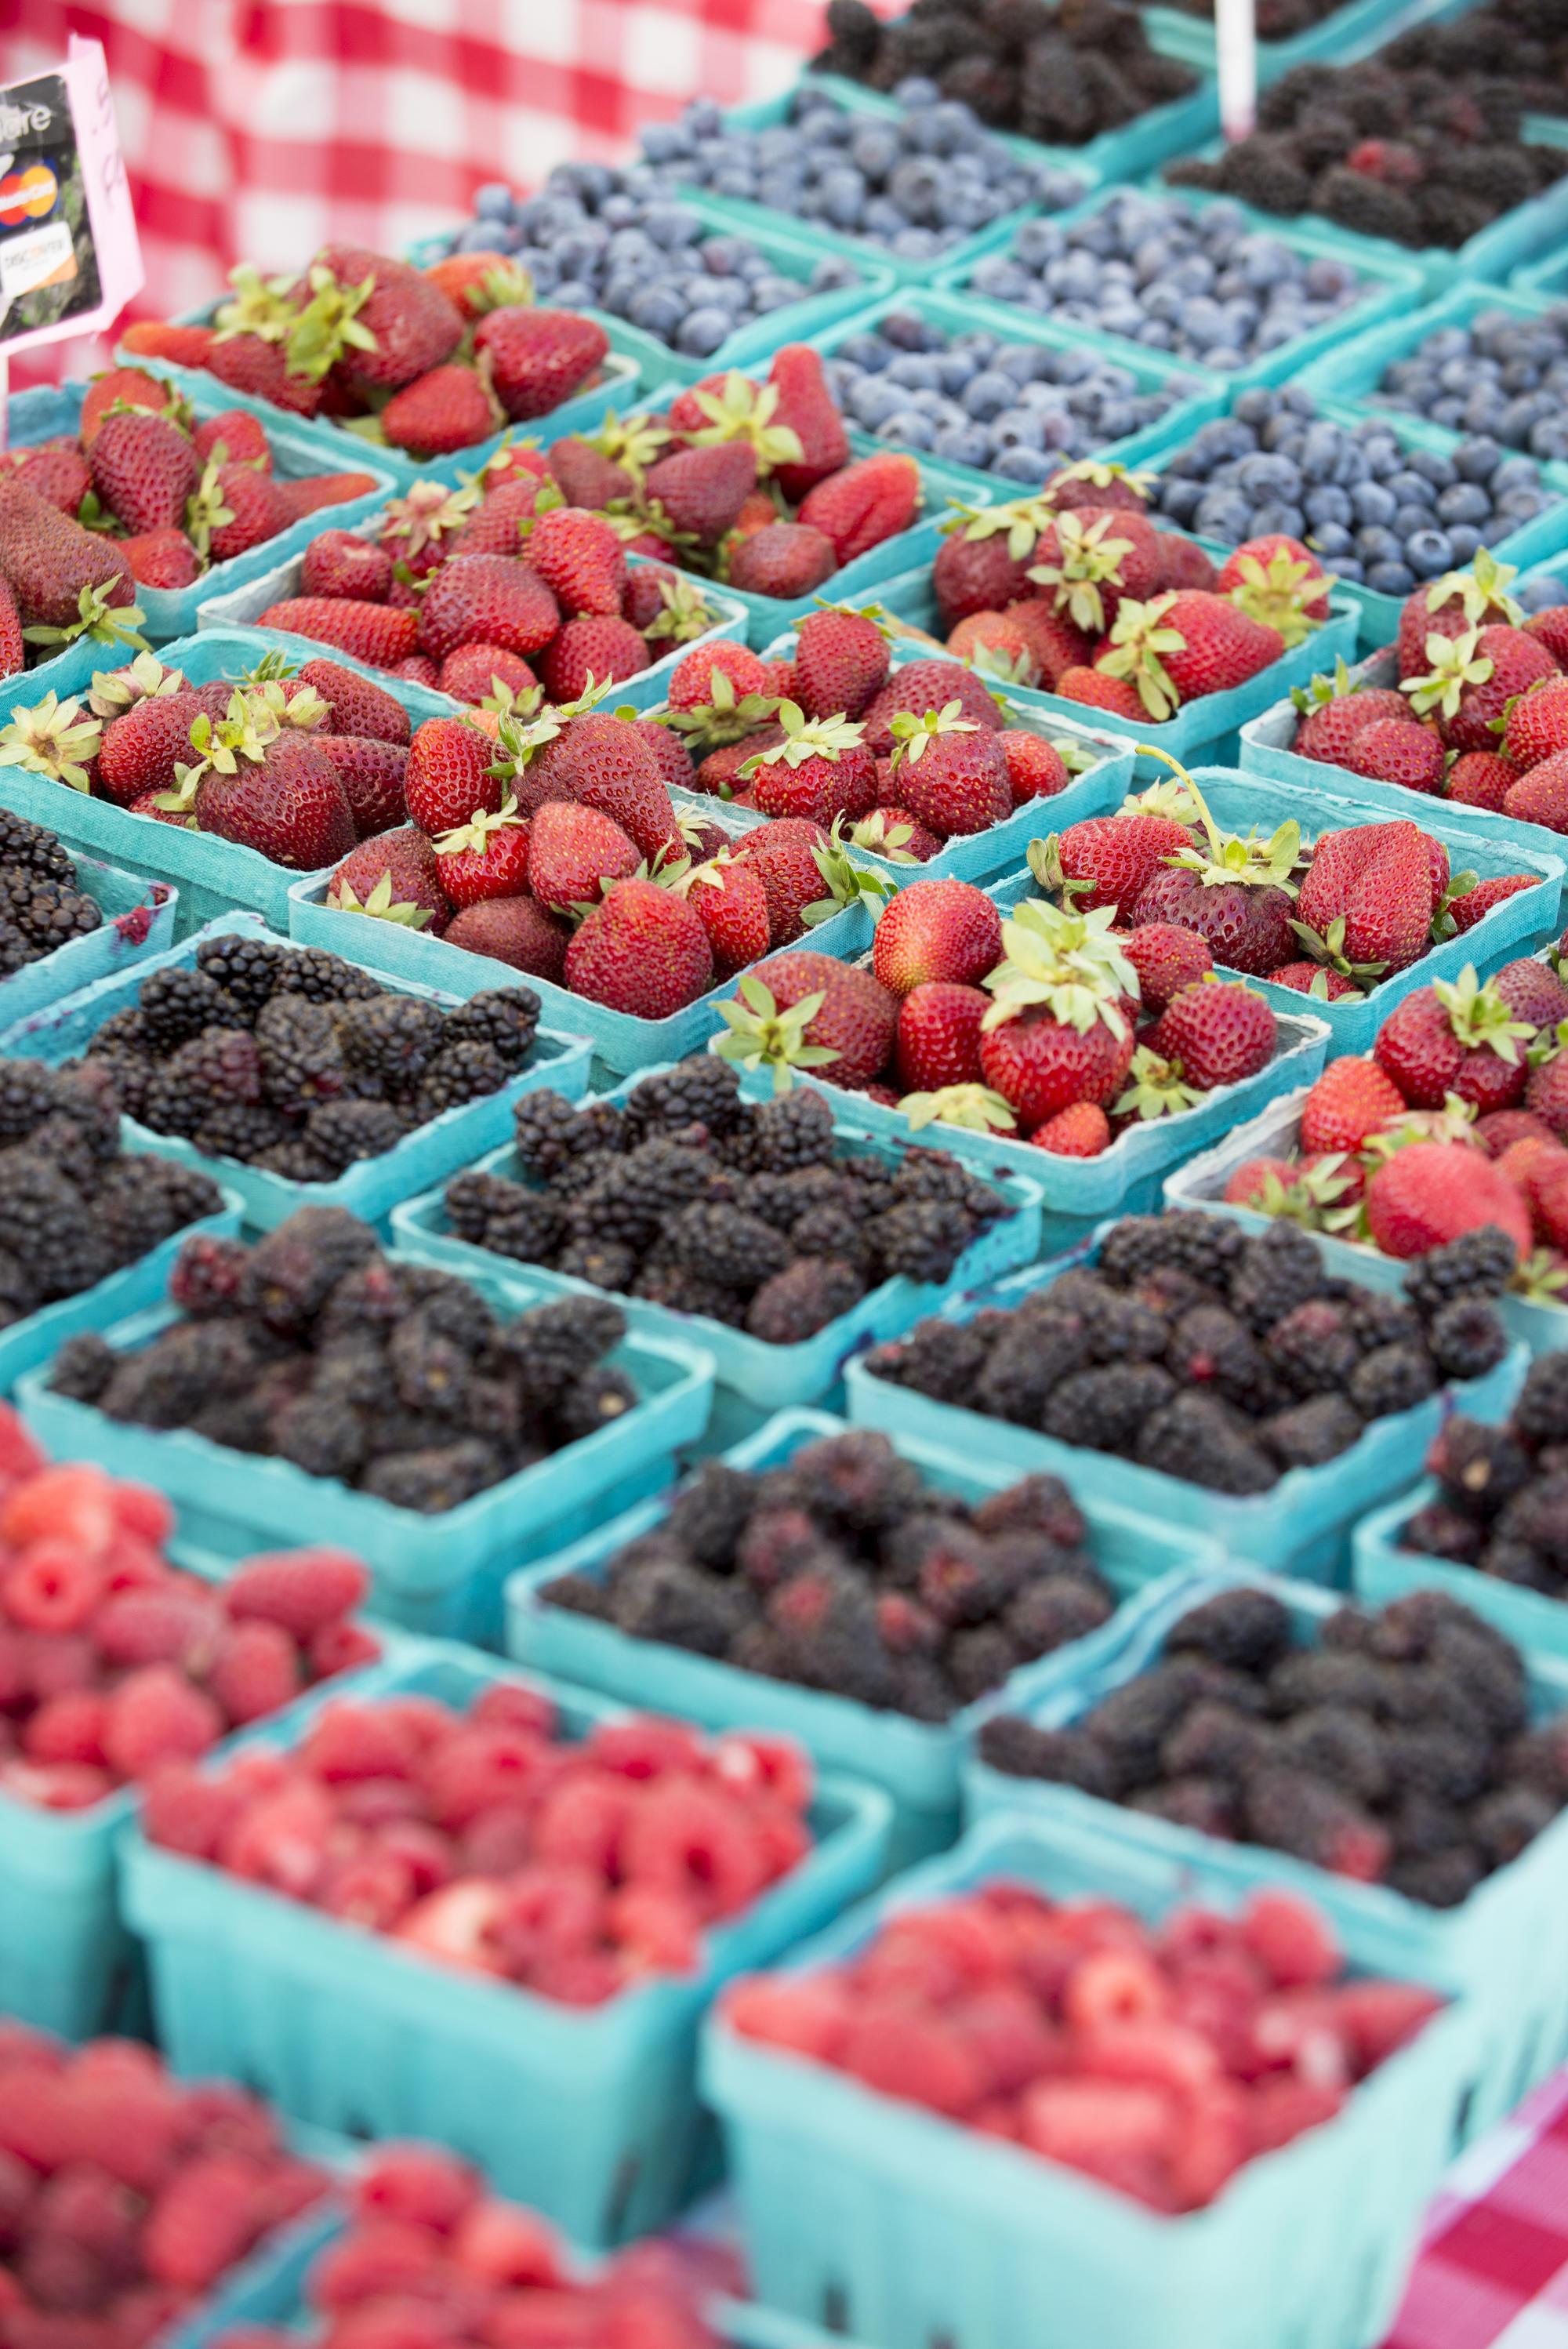 Boxes of berries -- raspberries, blackberries, strawberries and blueberries -- sit on a table at a farmers market.